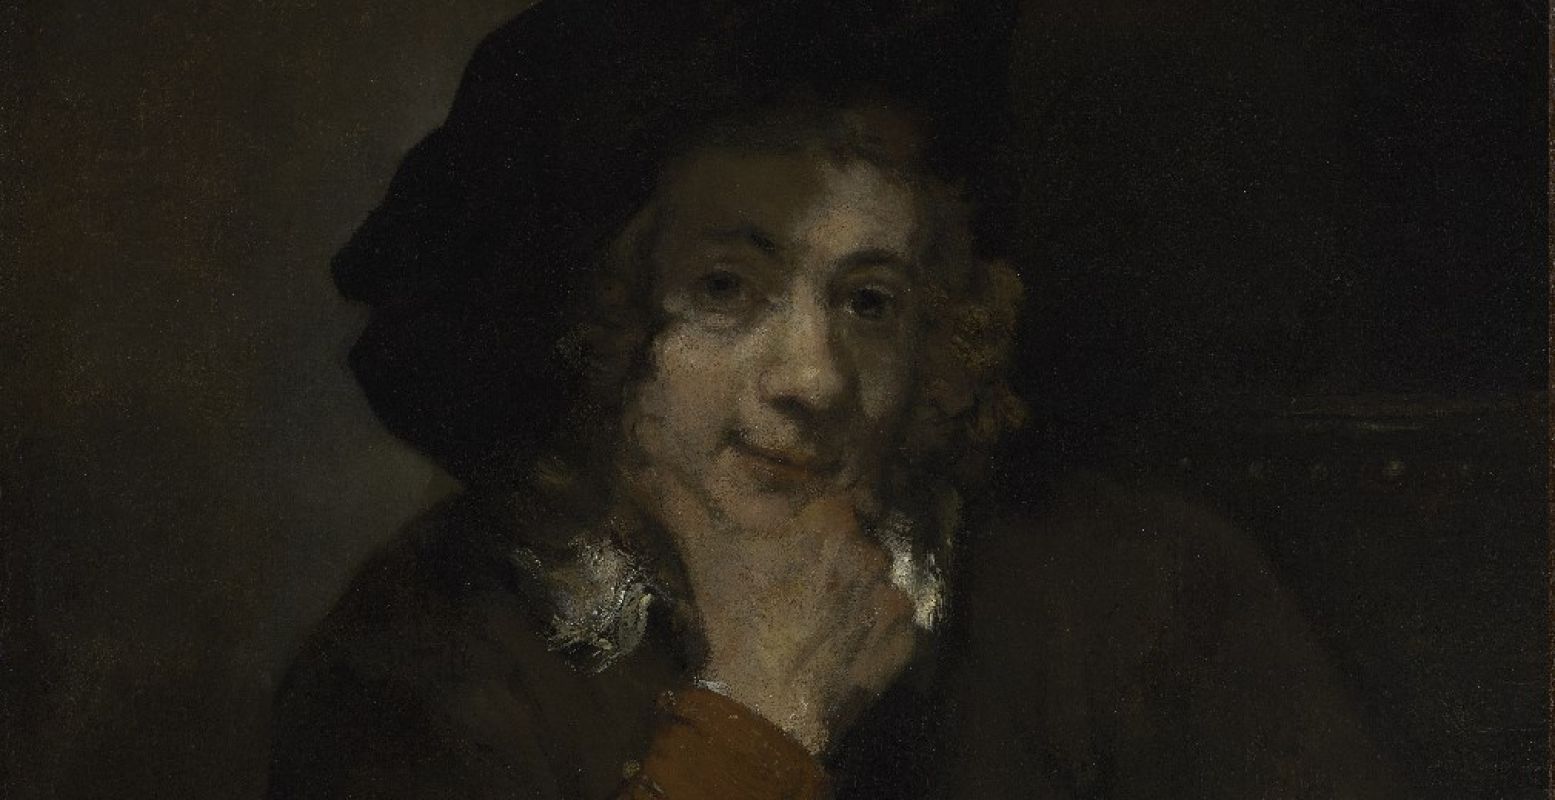 Rembrandt, Portret van Titus, ca. 1660, olieverf op doek, 81,5 x 78,5 cm, Baltimore Museum of Art (The Mary Frick Jacobs Collection). Foto: Rembrandthuis